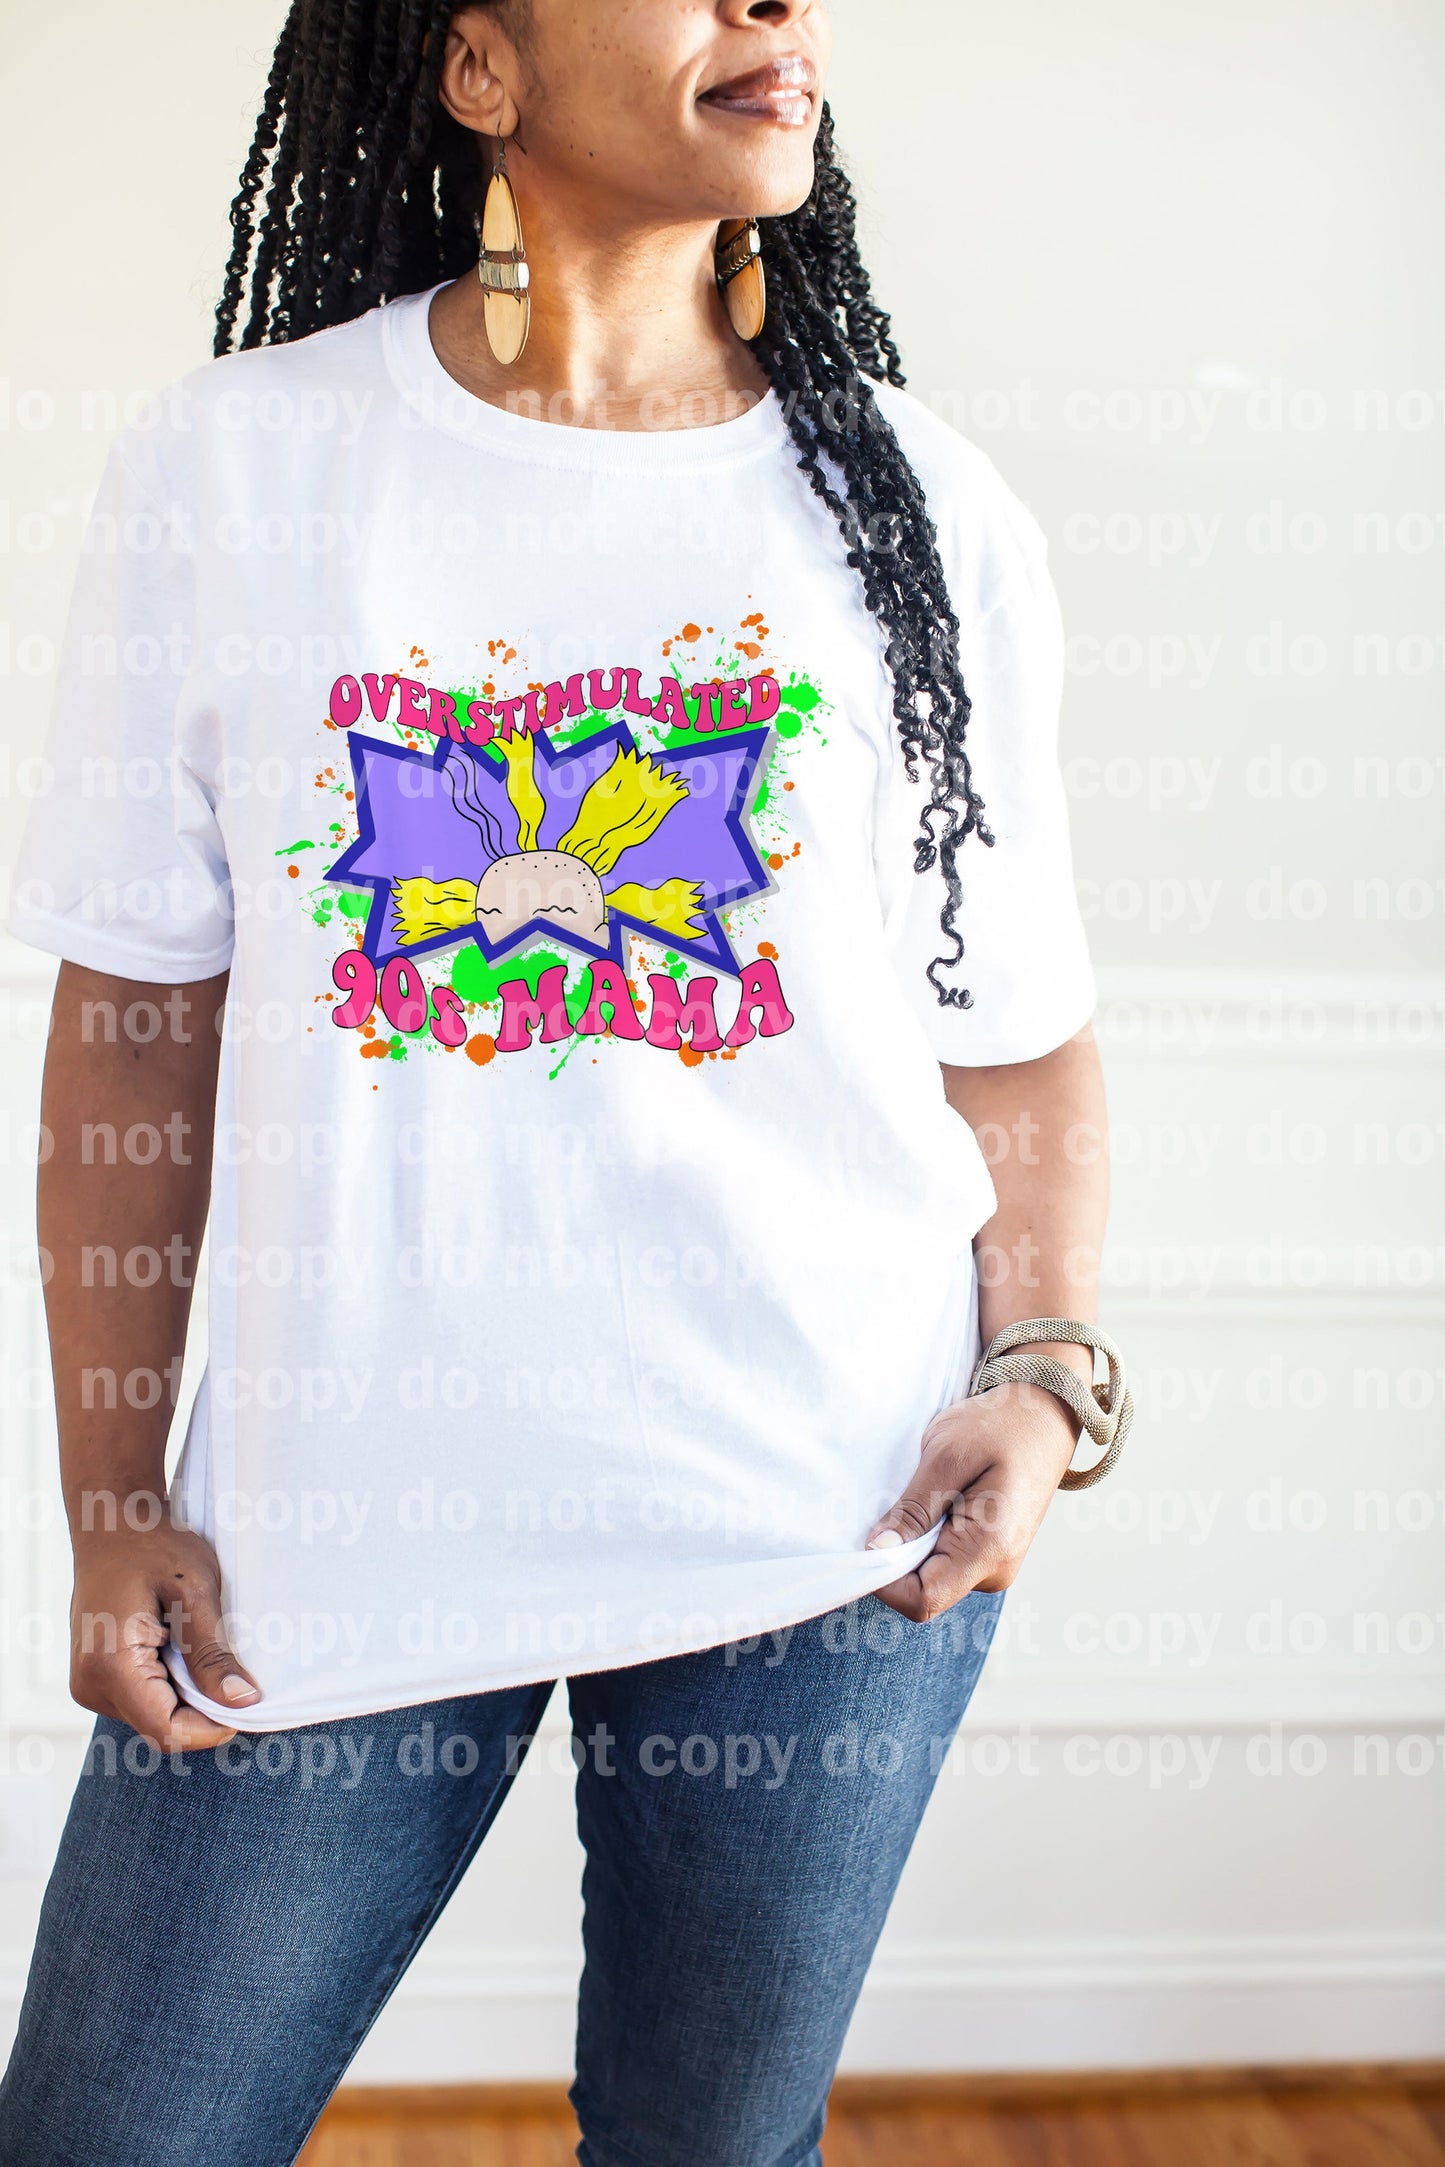 Overstimulated 90's Mama Dream Print or Sublimation Print